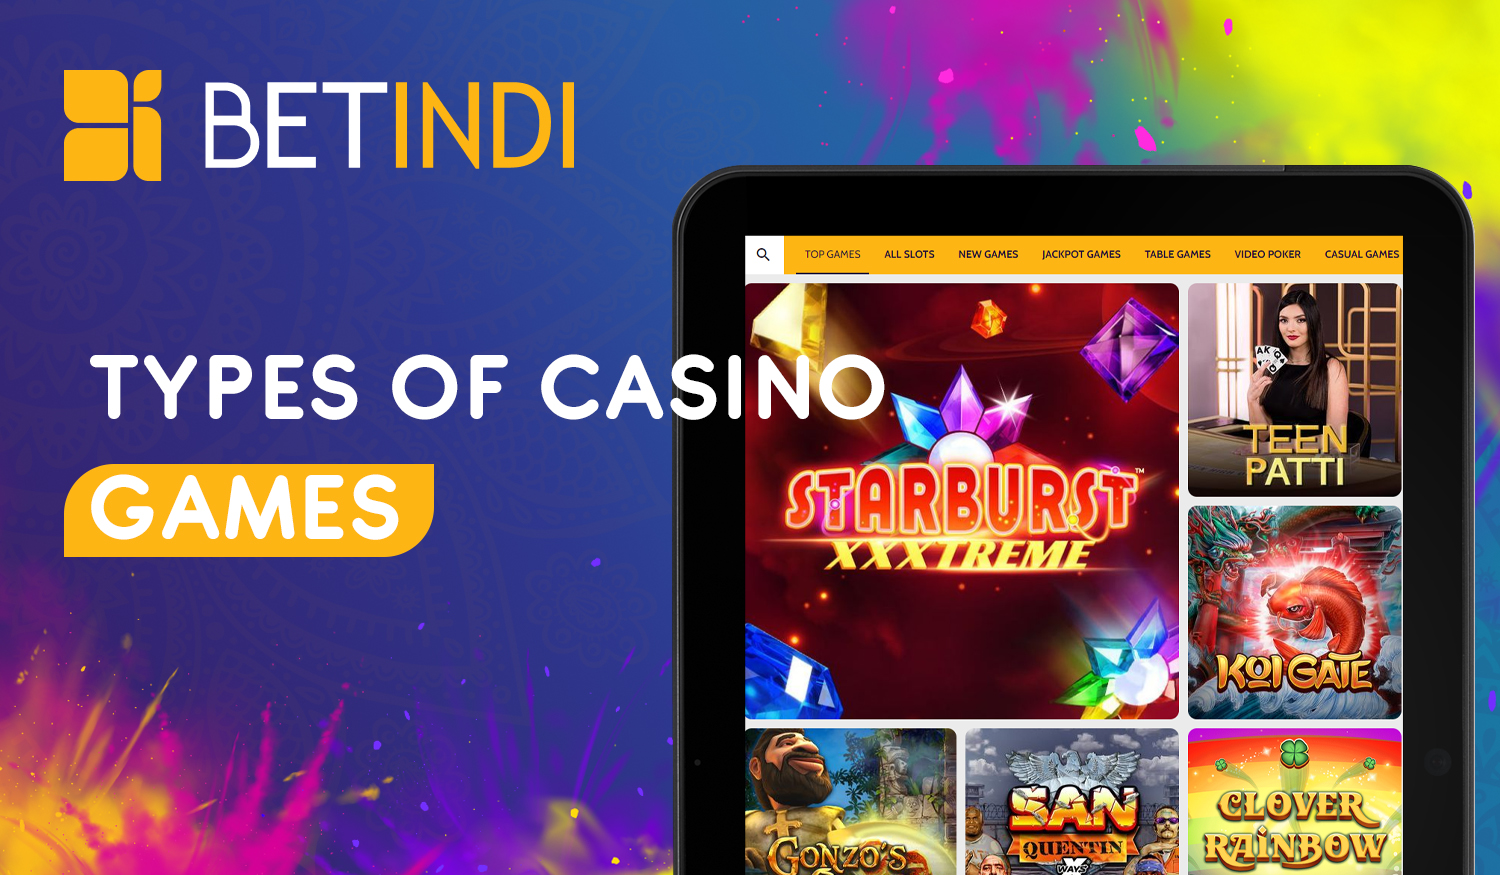 What types of games are available in the Betindi section casino